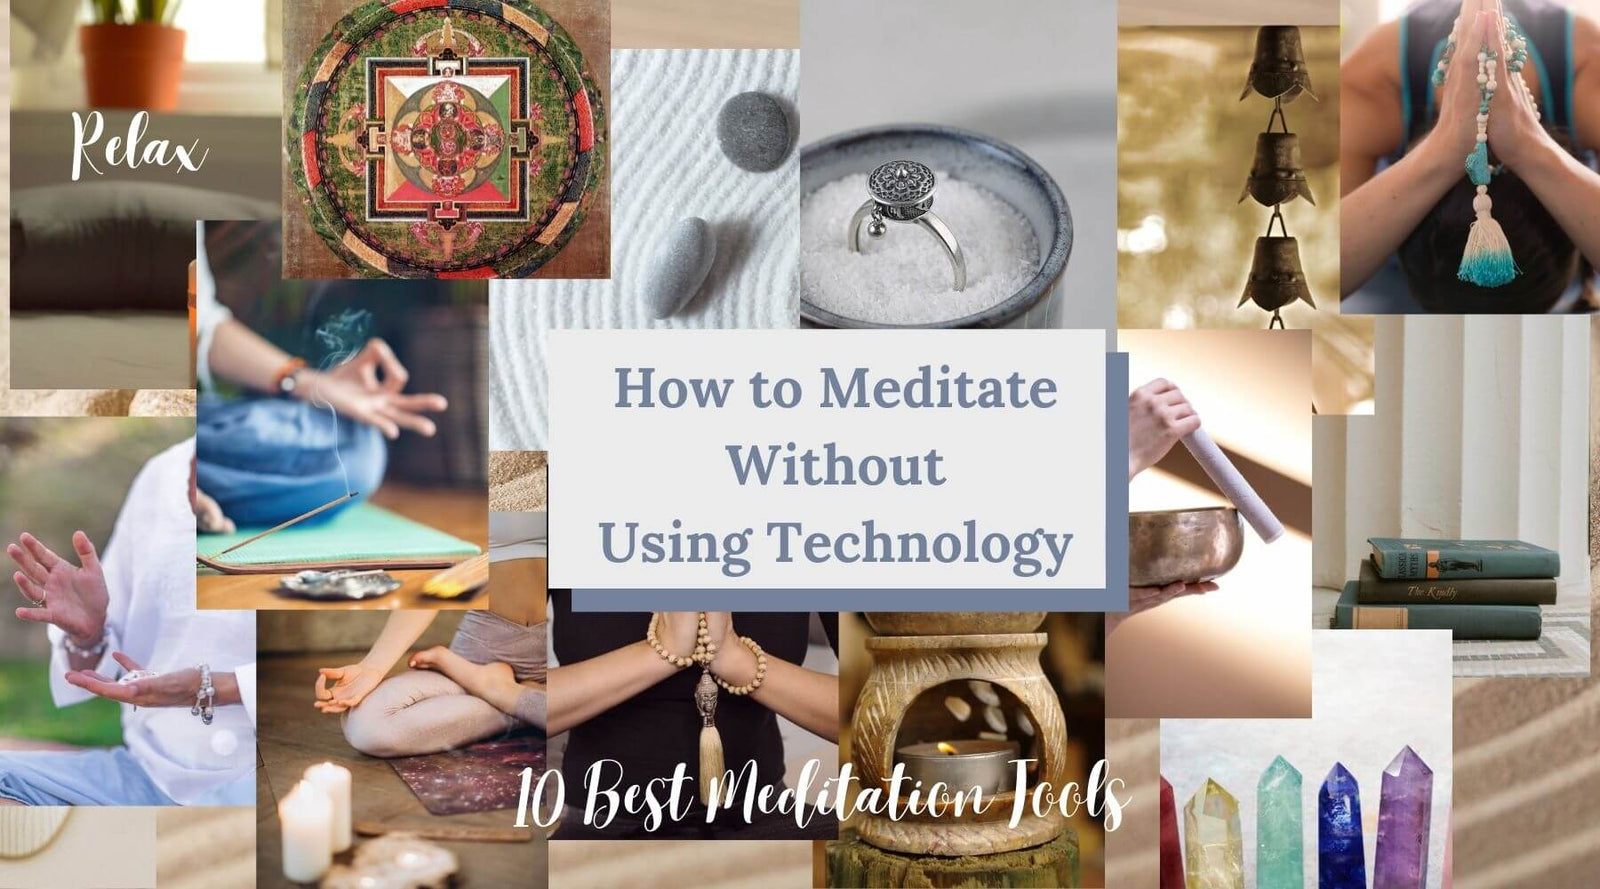 10 traditional meditation tools - My Anxiety Ring